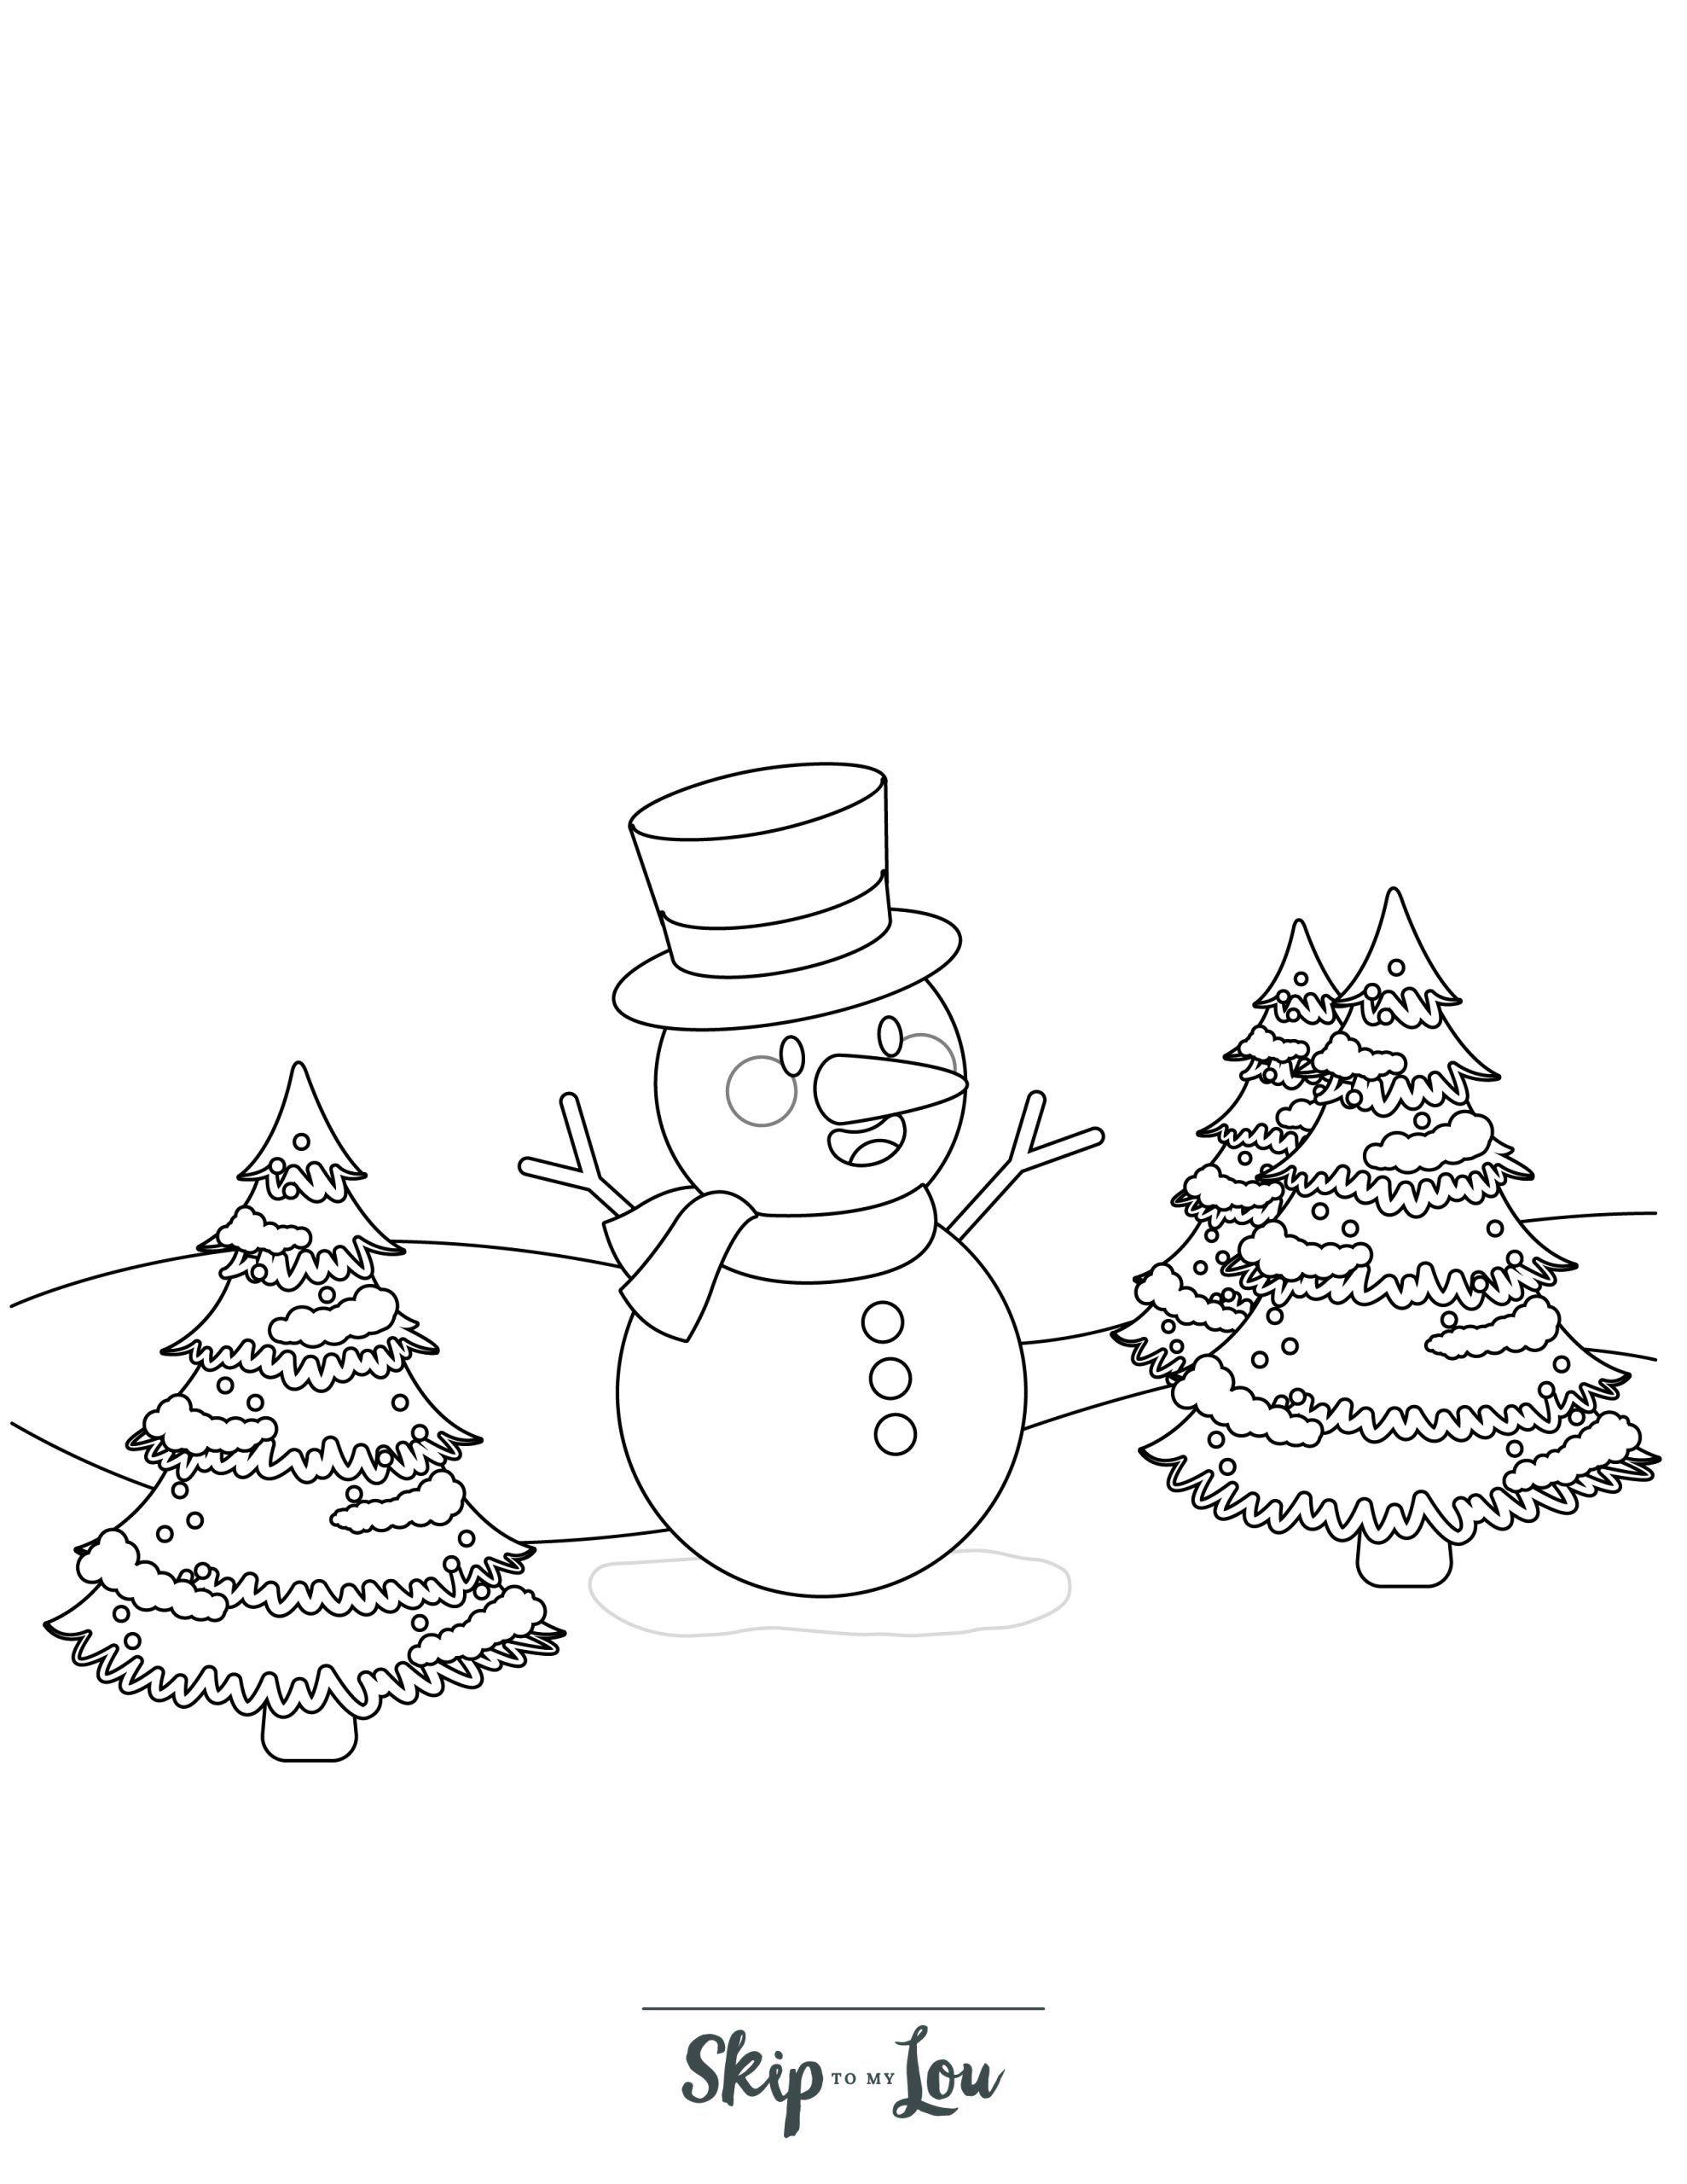 Skip to my Lou - Christmas Coloring Pages - Line drawing of a snowman with two Christmas trees